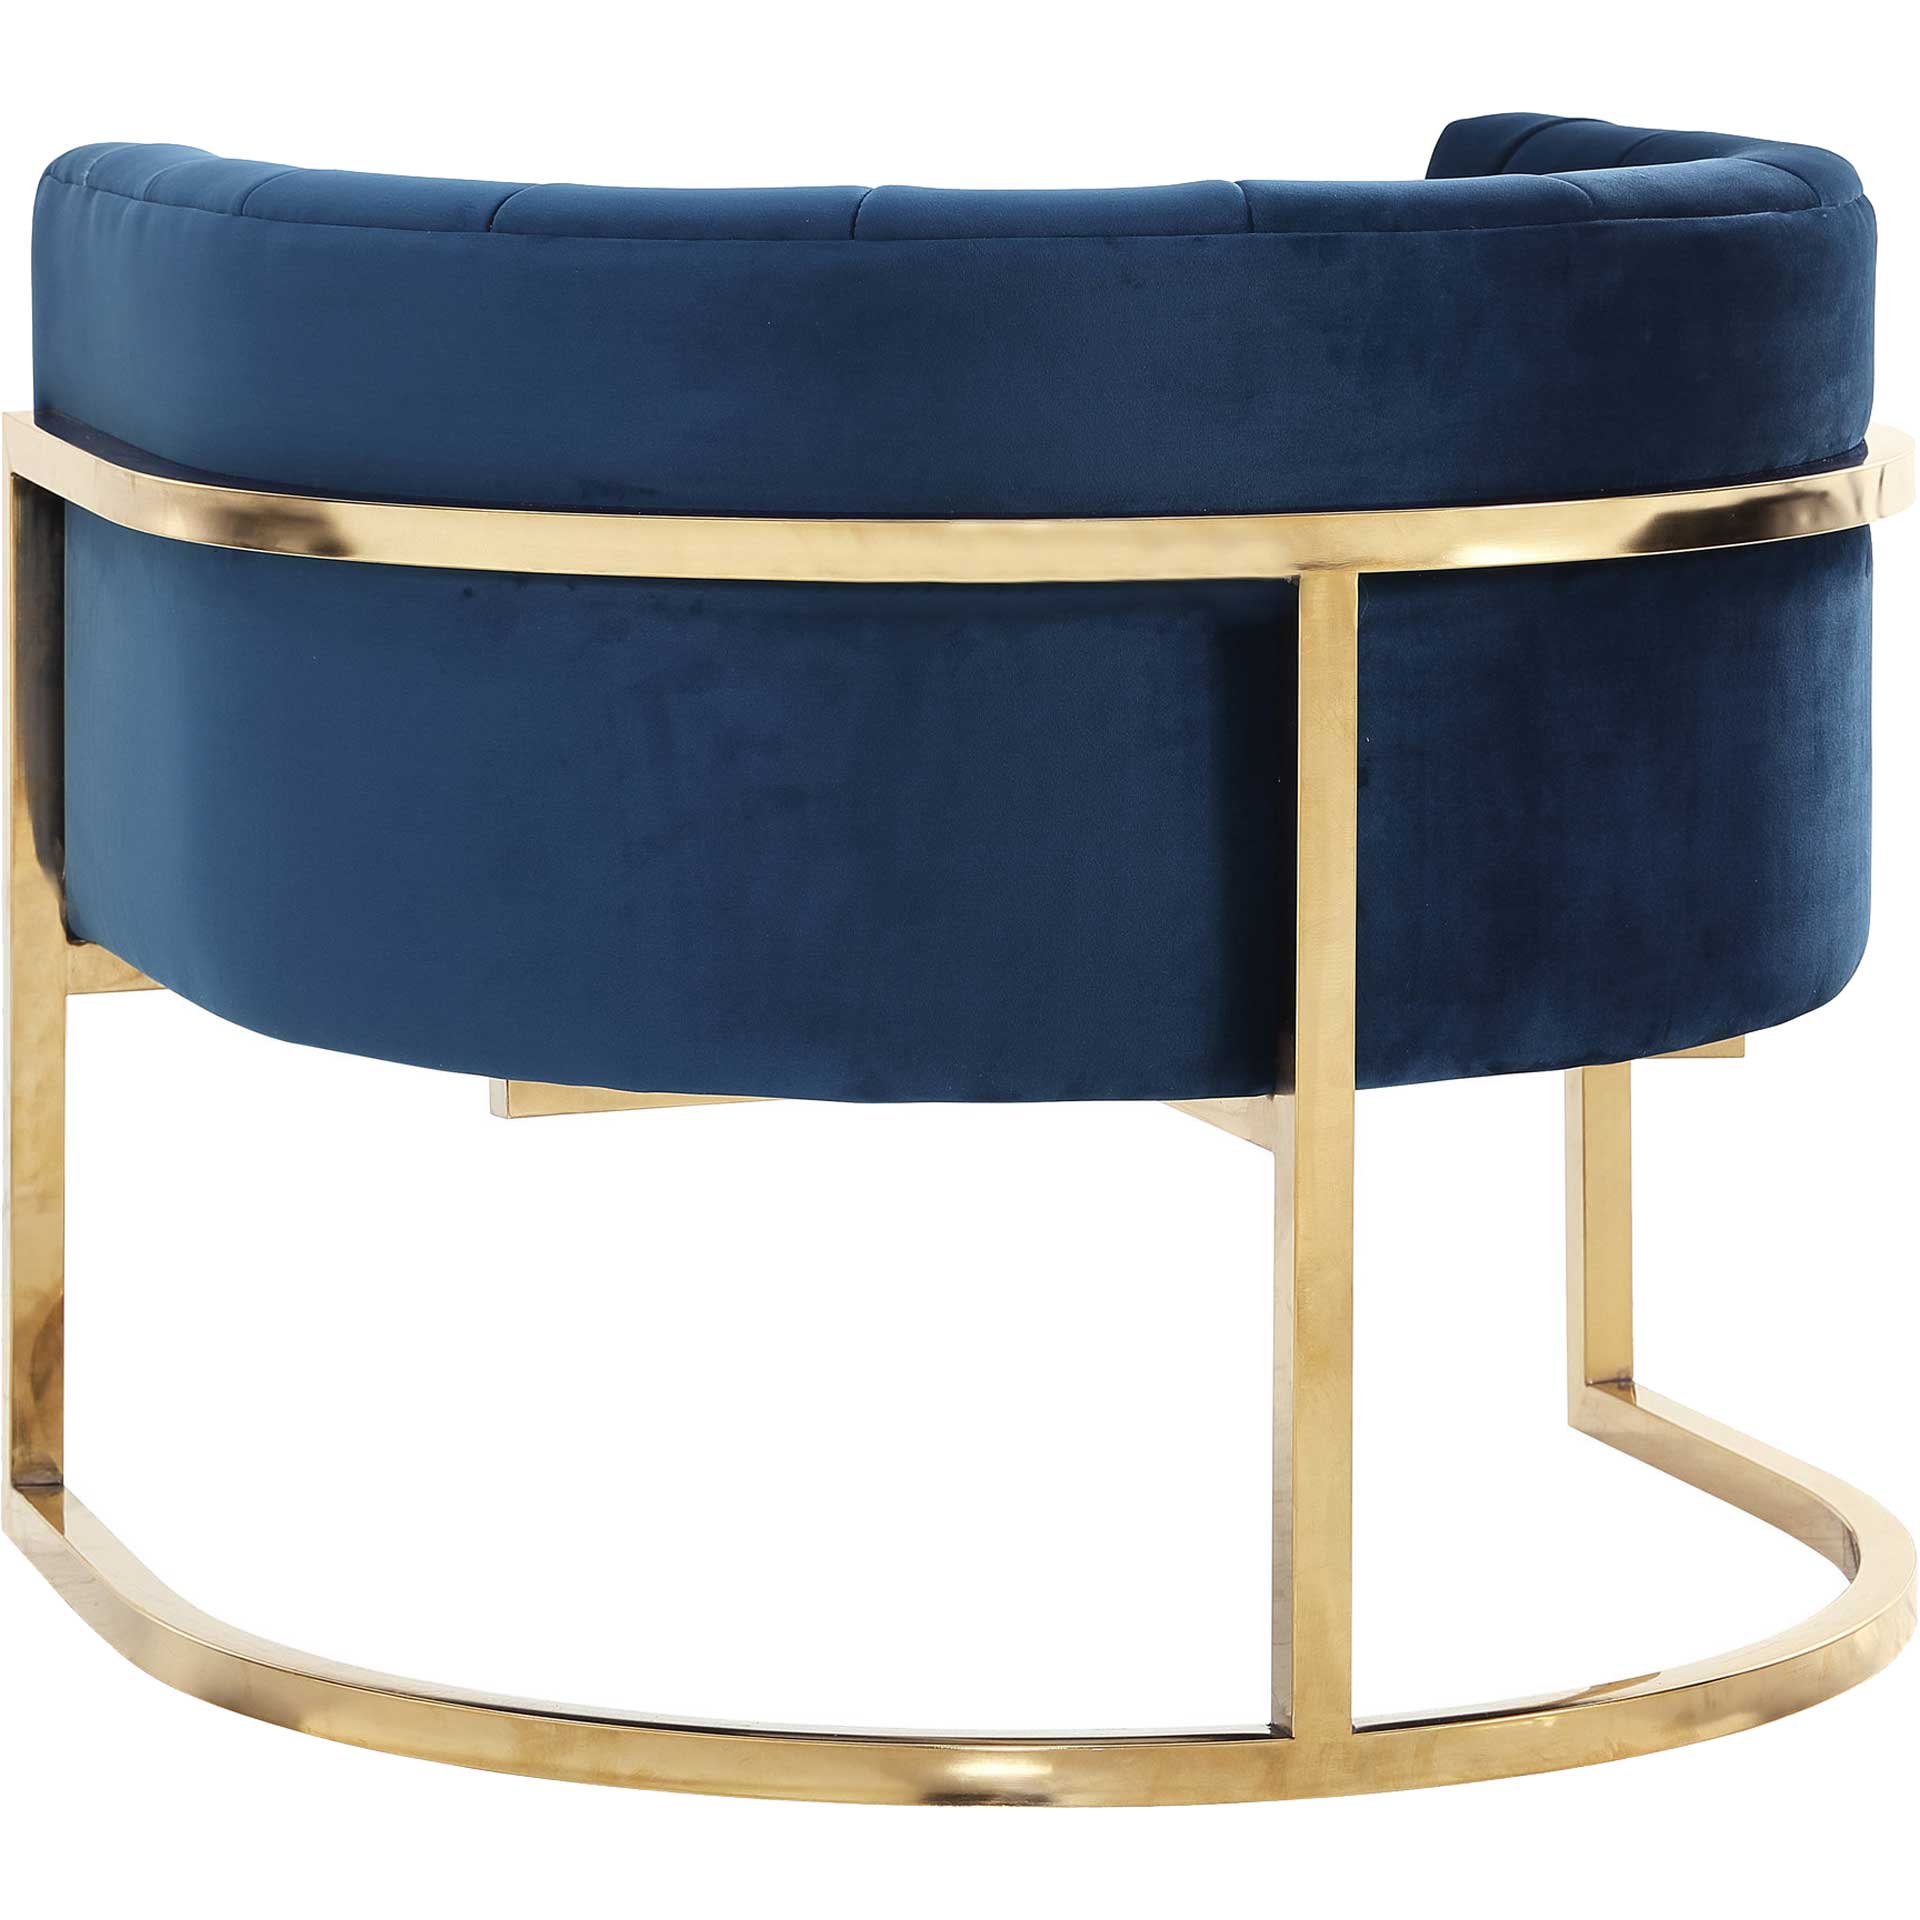 Maddison Chair Navy/Gold